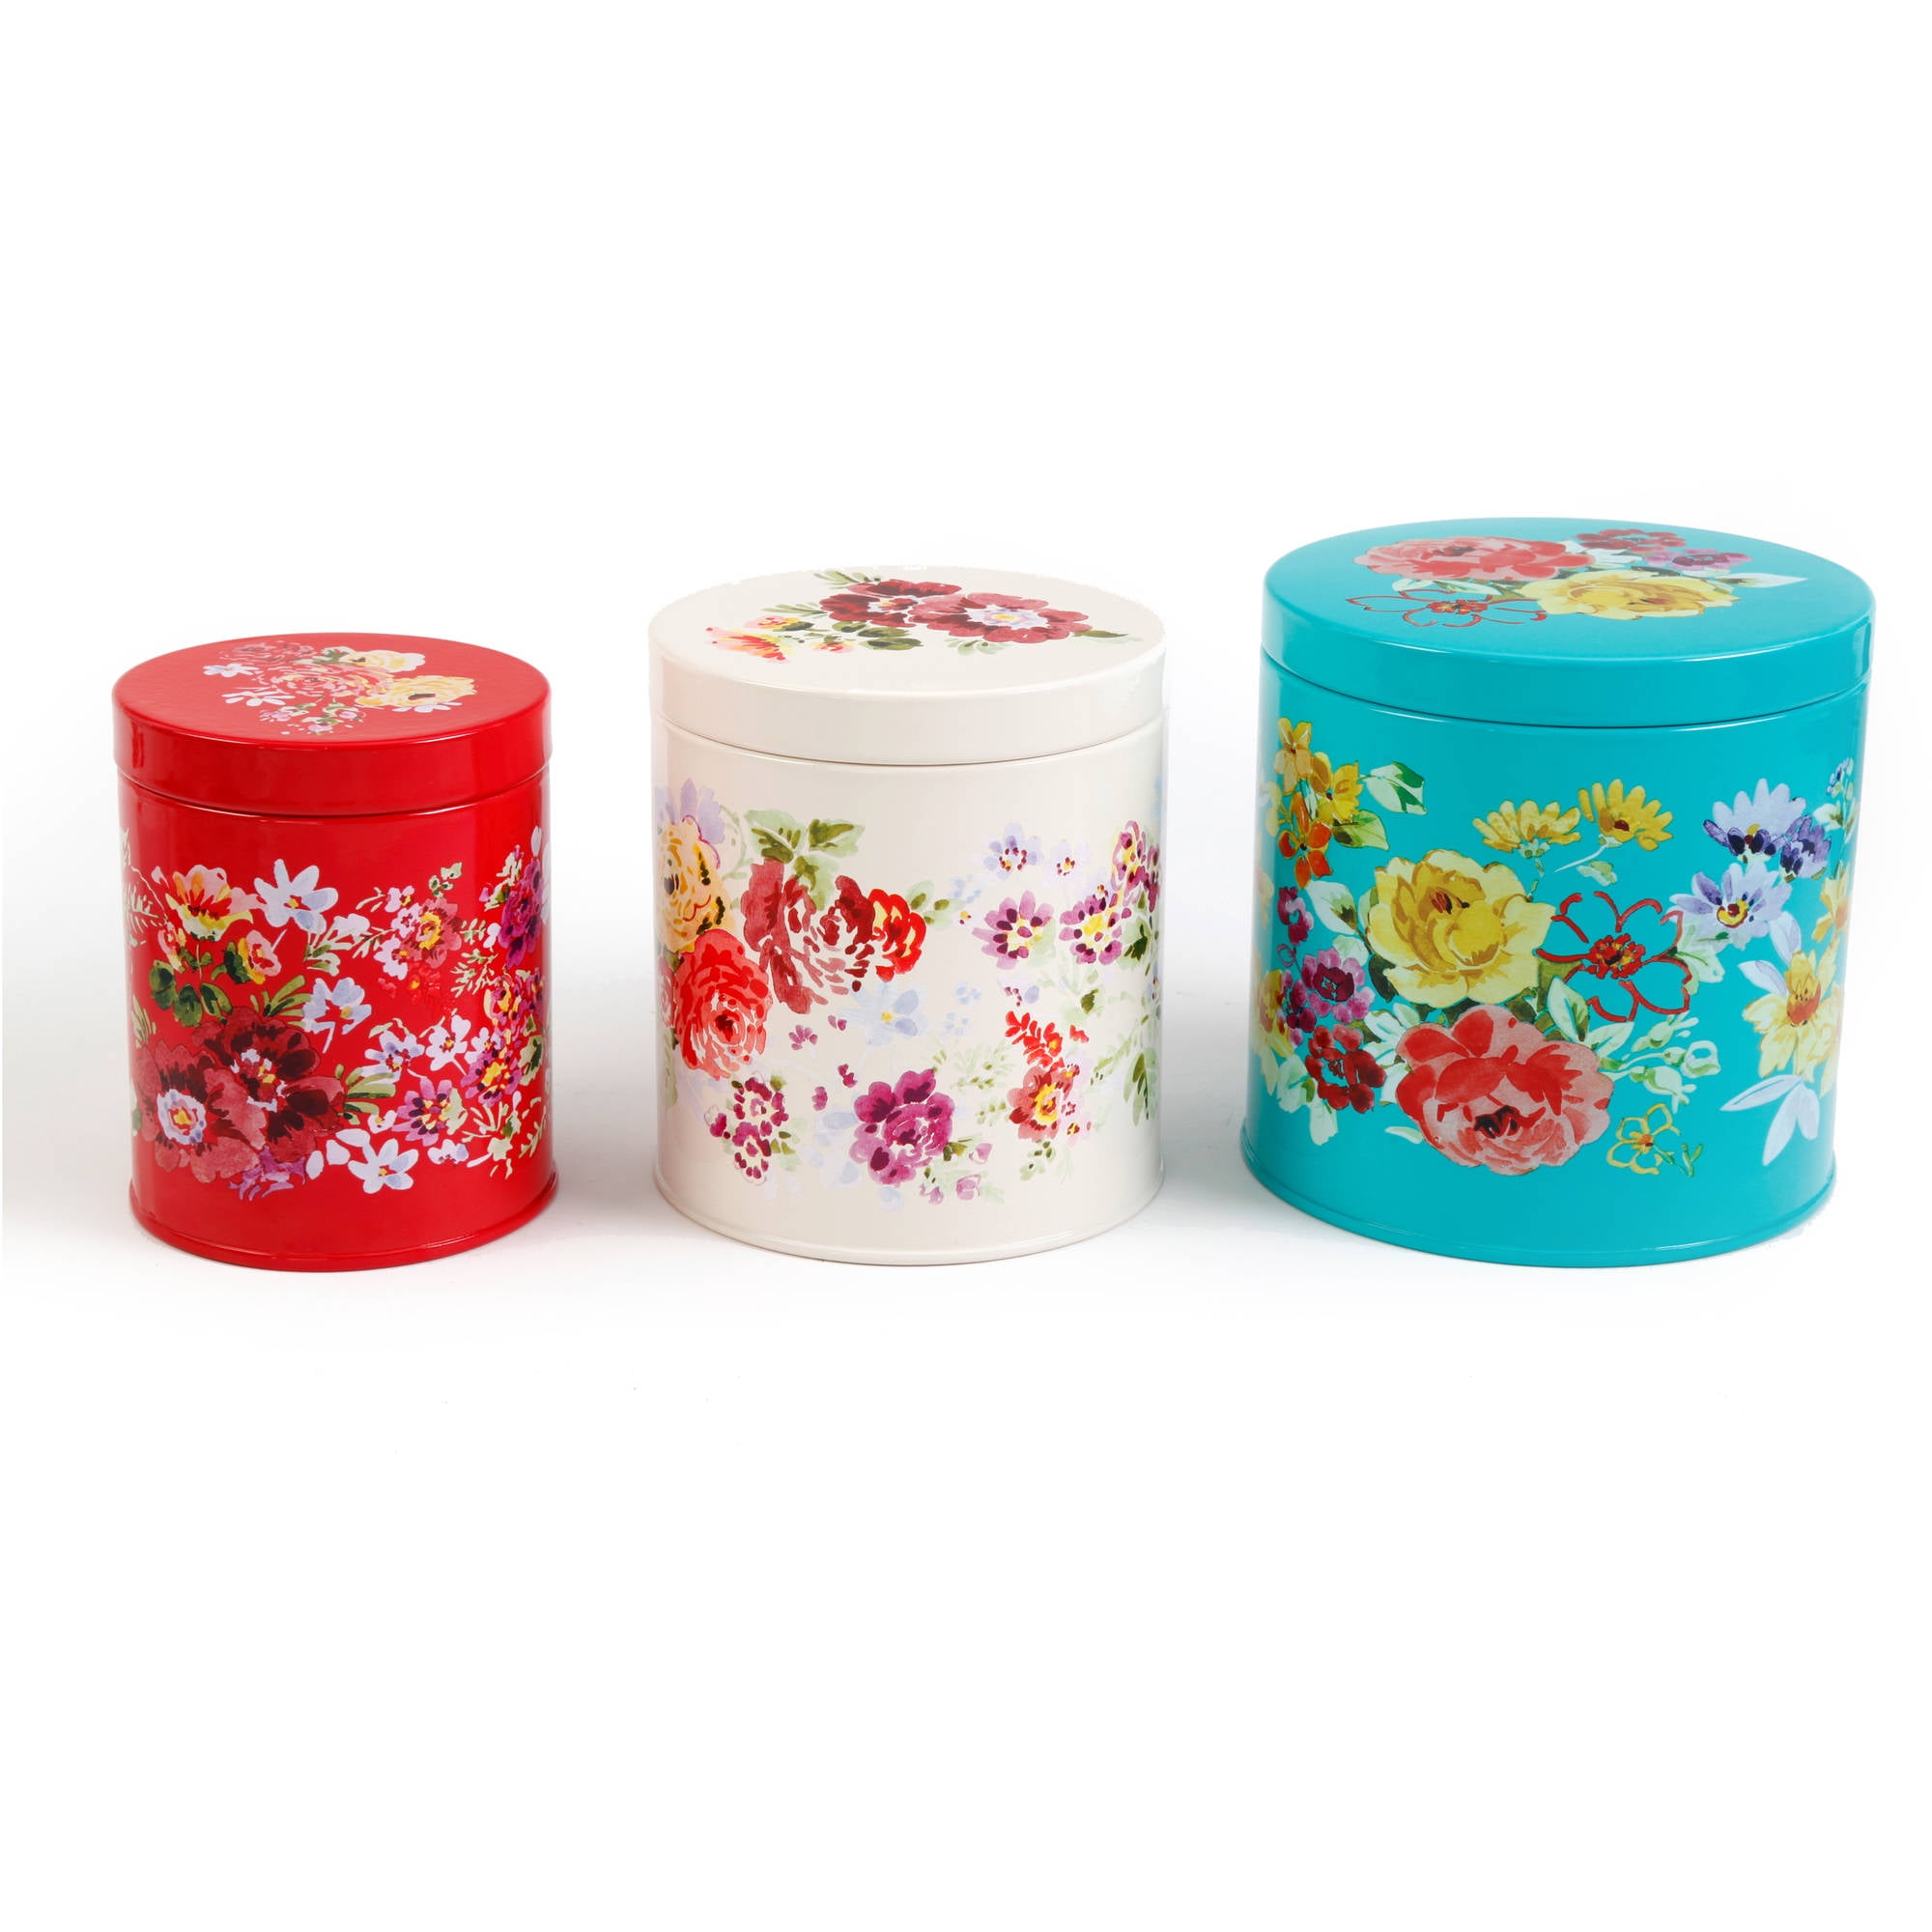 Pioneer Woman Metal Floral Canisters Rustic Kitchen/Farm House Set of 3